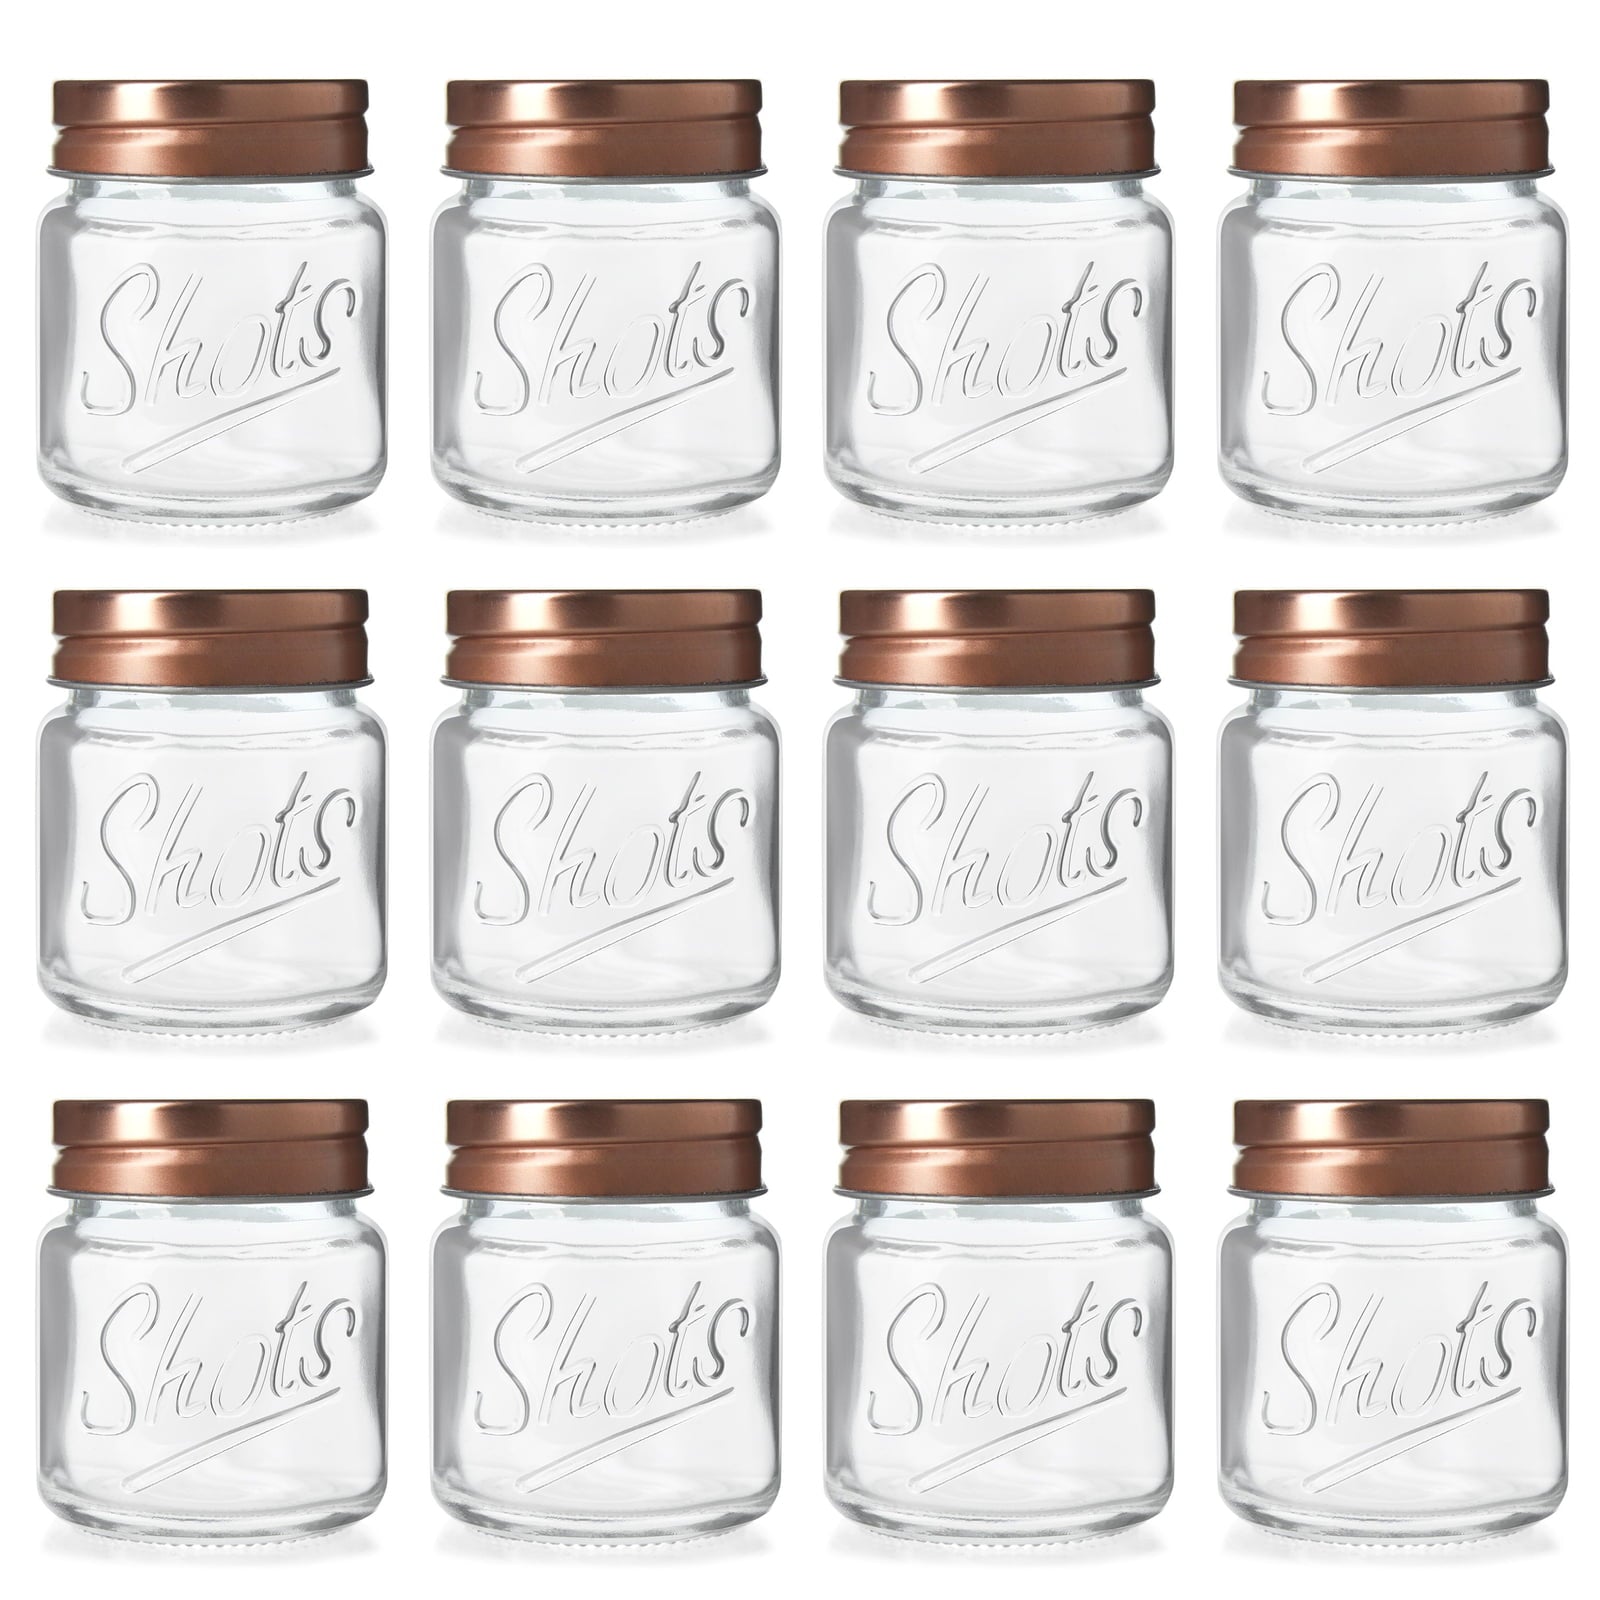 12-Pack Mini Mason Jar Shot Glasses with Lids， Bulk 2 Ounce Glasses for Ginger Shots， Juices， Cocktails， Homemade Sauces， Honey， Jams， Salad Dressings， and Spices